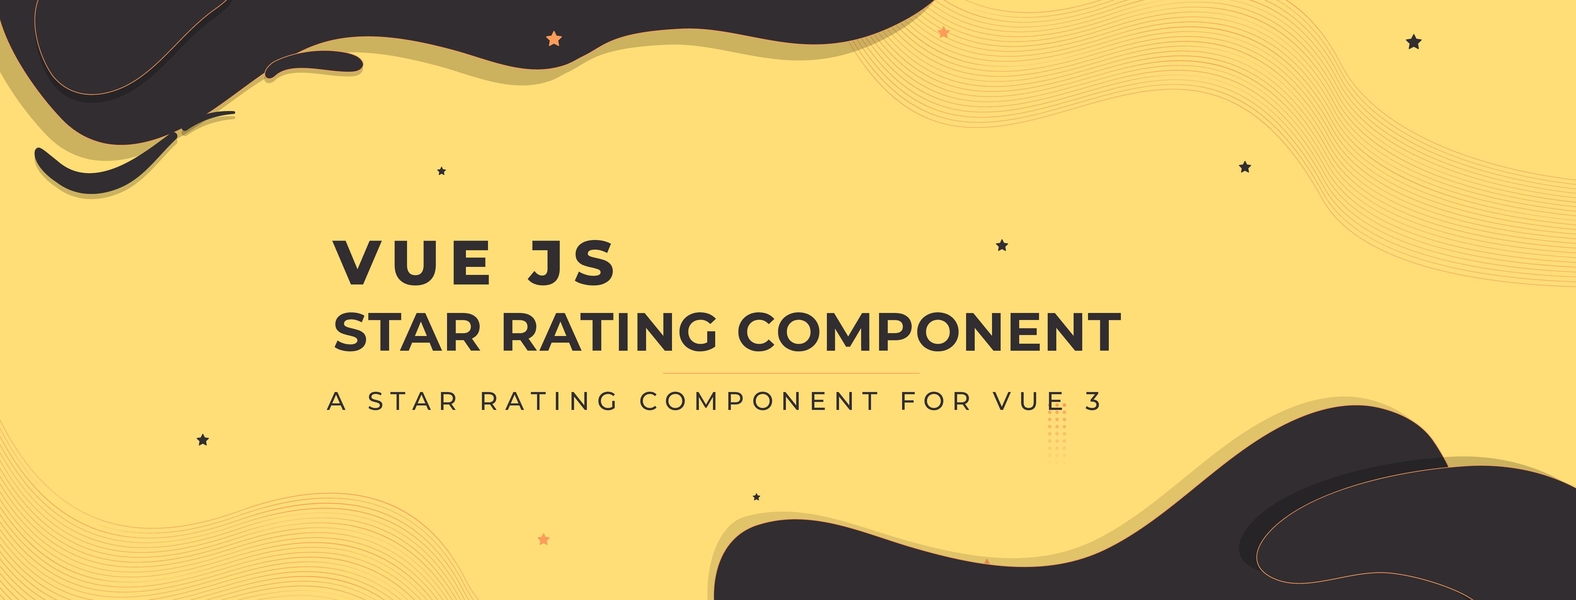 A customizable Star Rating Component Made with Vue Js cover image